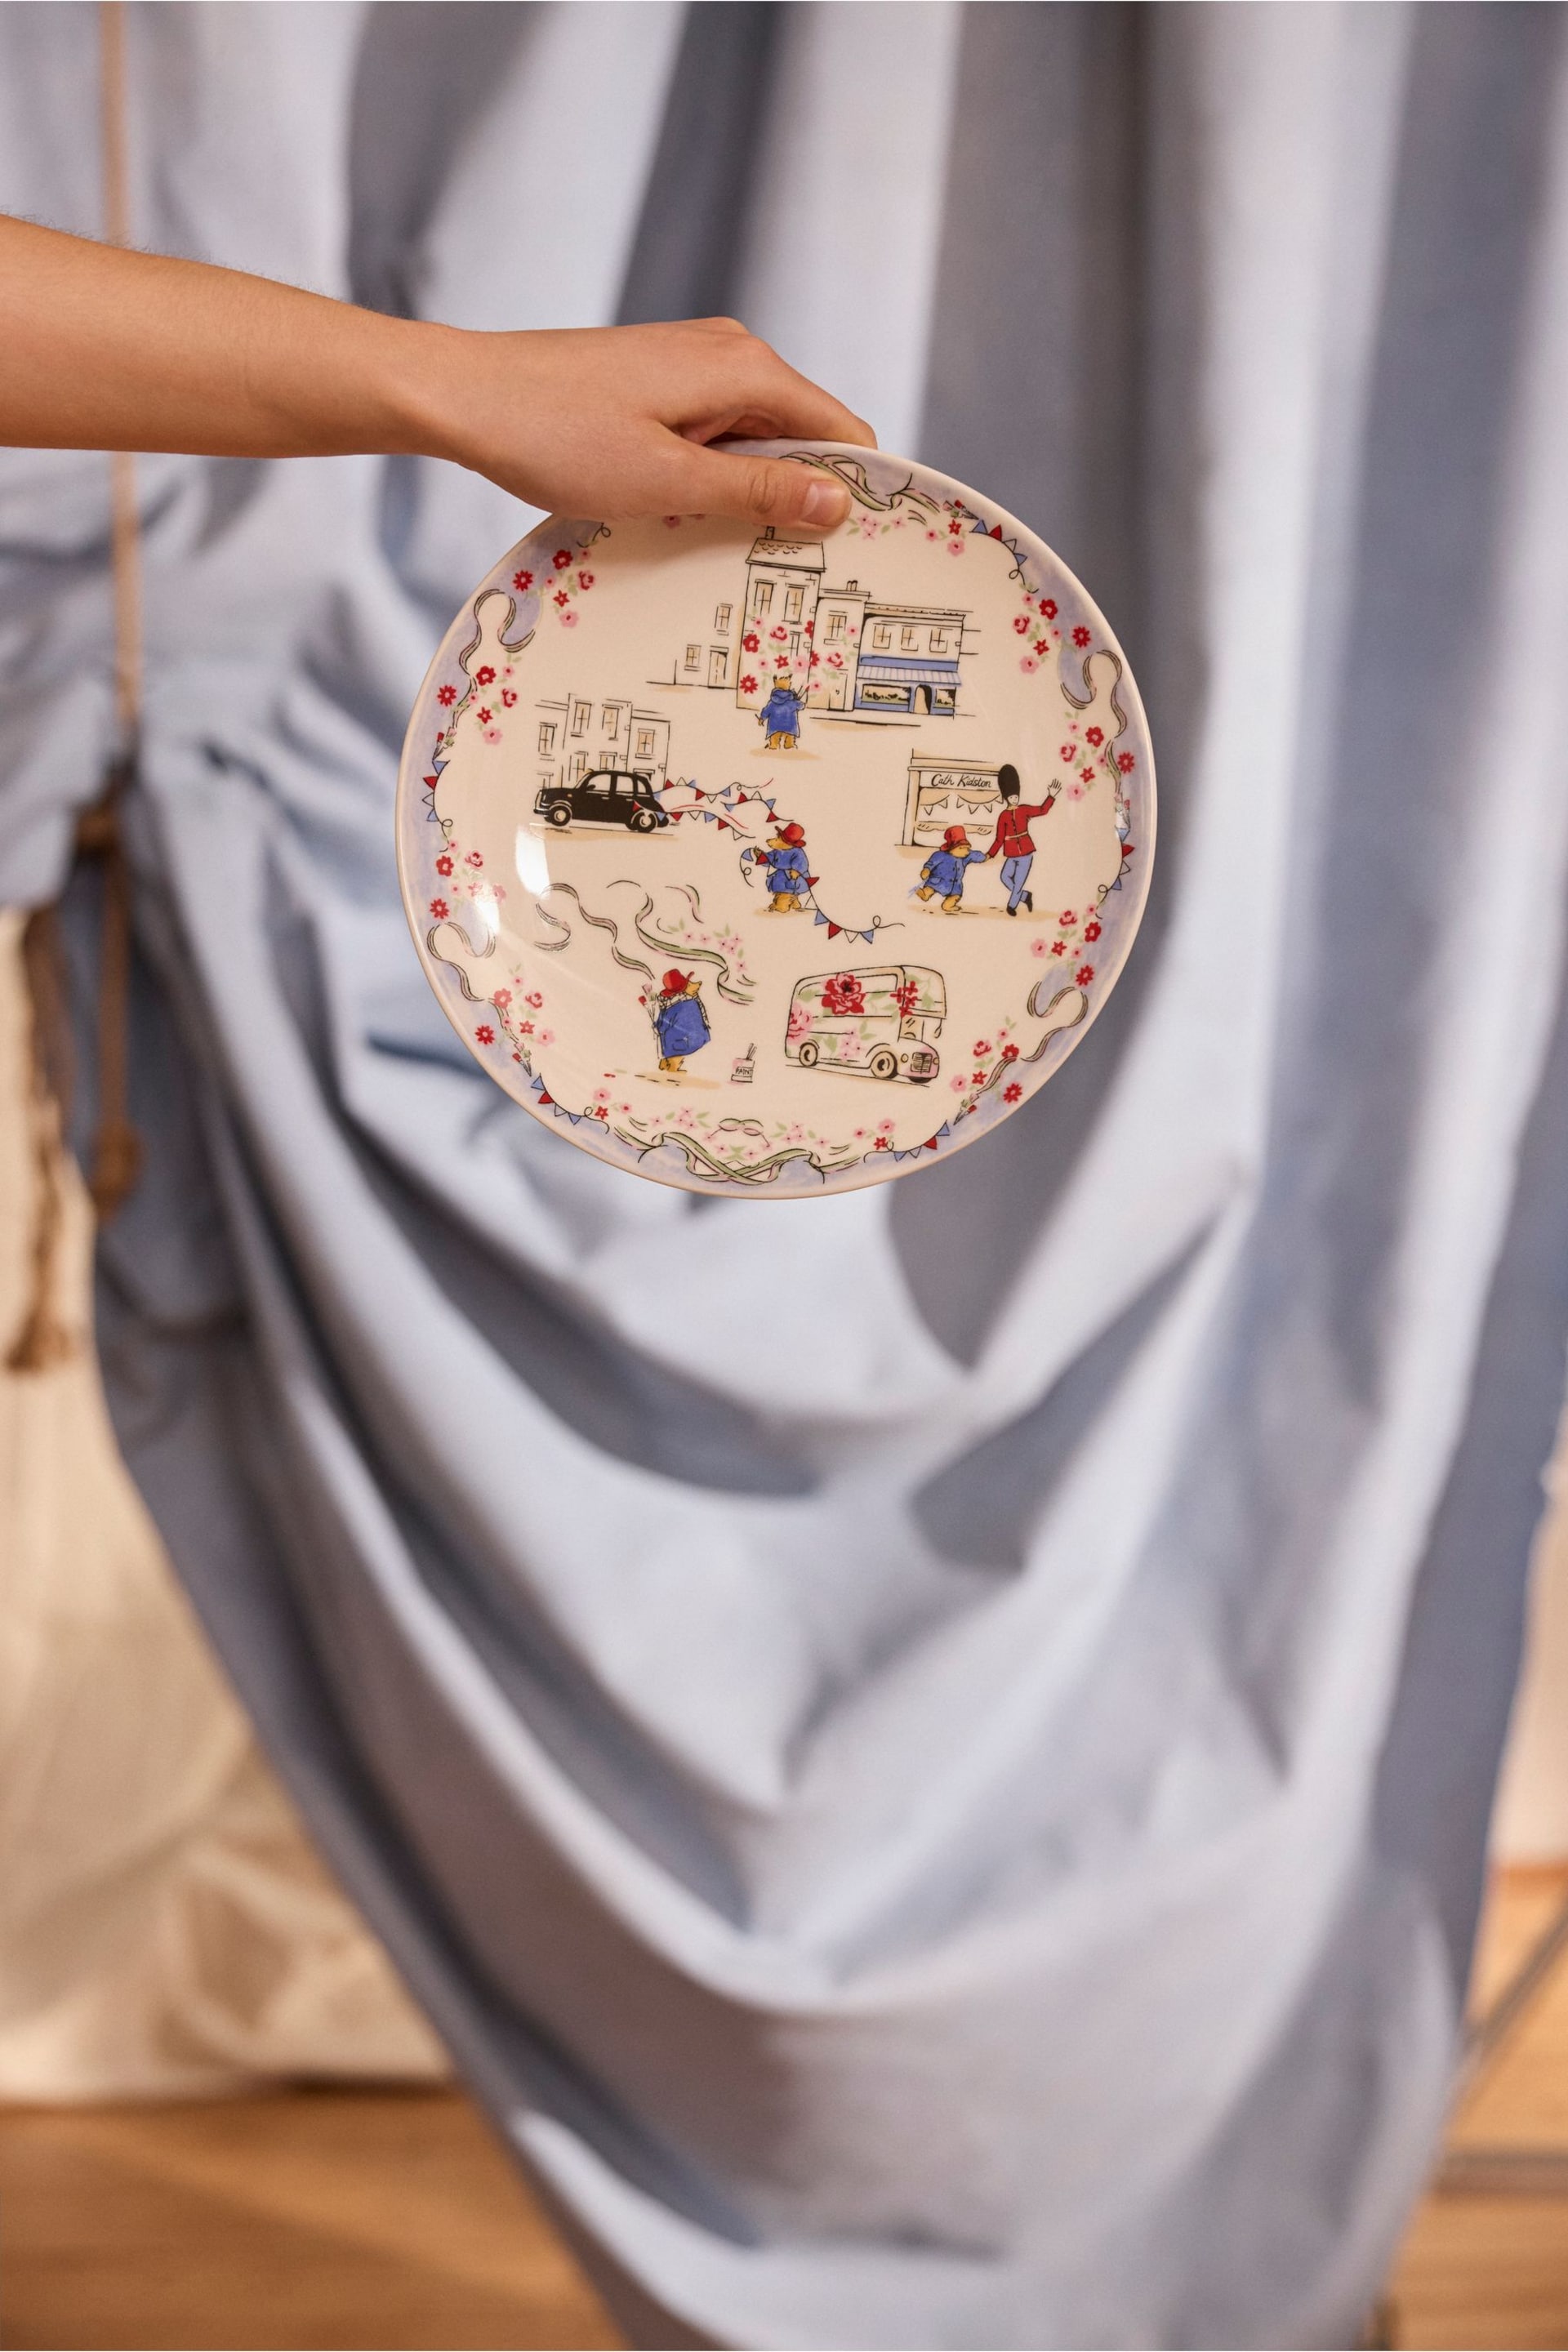 Cath Kidston Multi Paddington Goes to Town Side Plate - Image 12 of 15